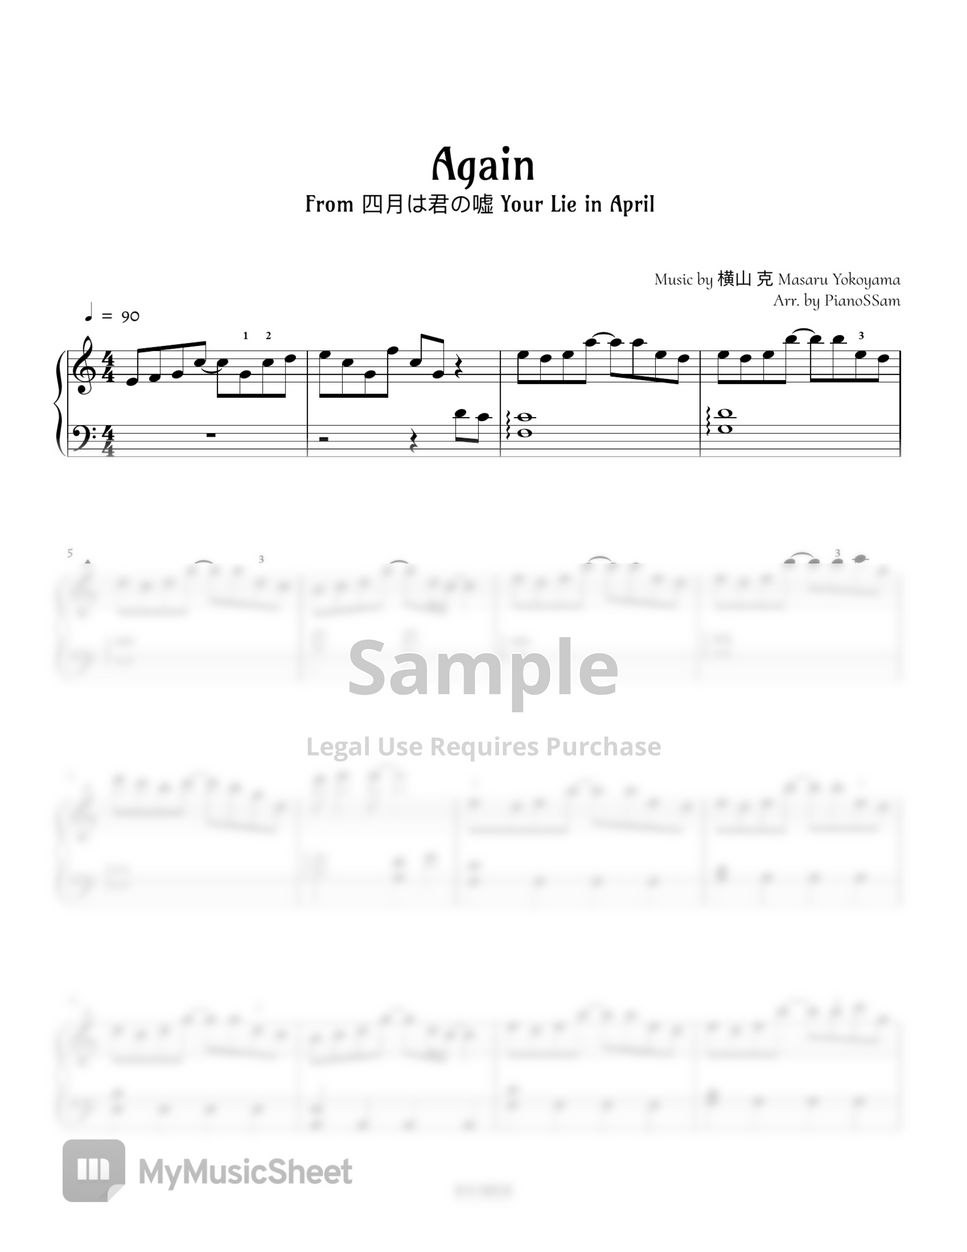 Your Lie in April - Again by PianoSSam